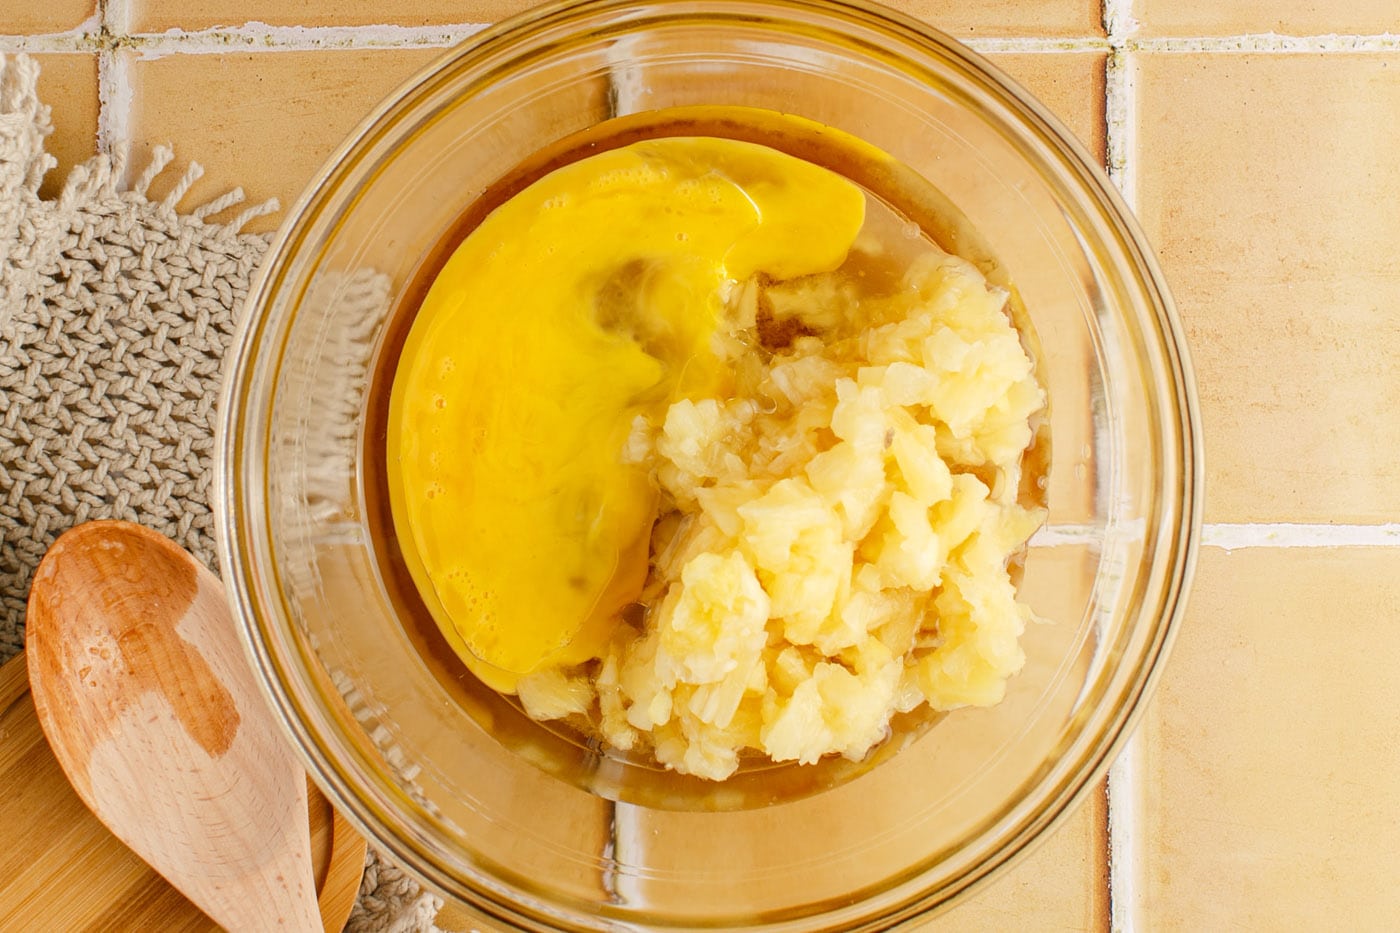 egg and pineapple added to brown sugar mixture